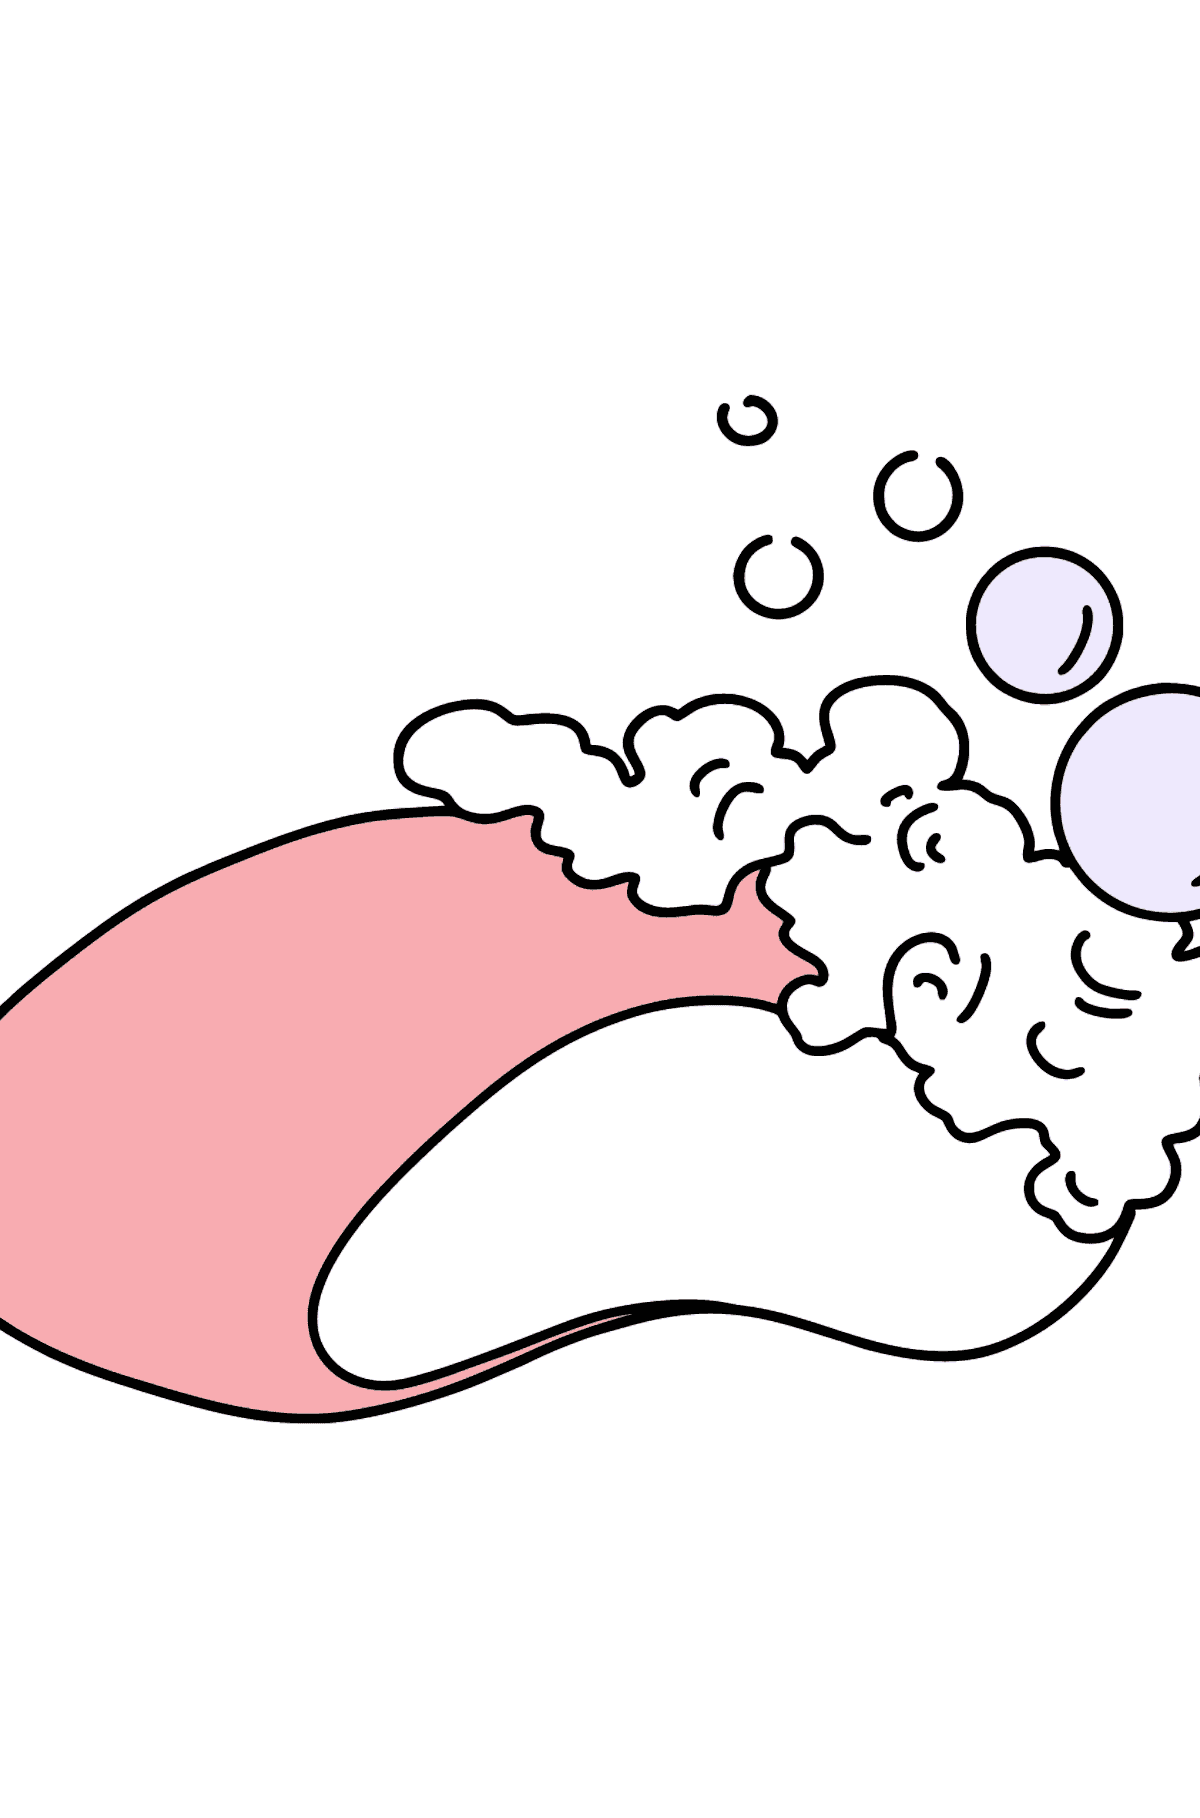 Soap coloring page - Coloring Pages for Kids